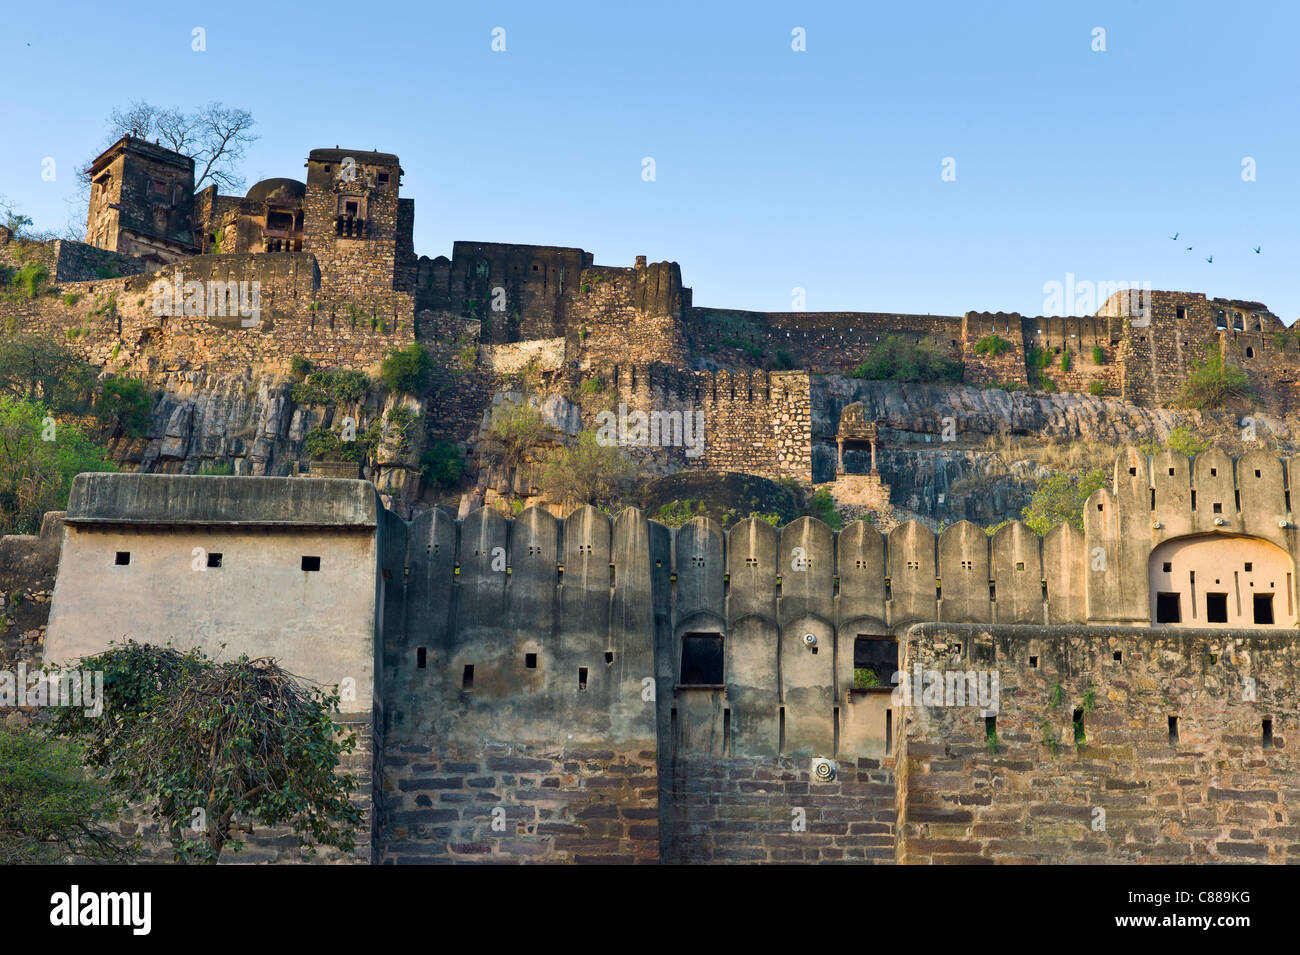 Ranthambore Fort heritage site nel Rajasthan, India settentrionale Foto Stock